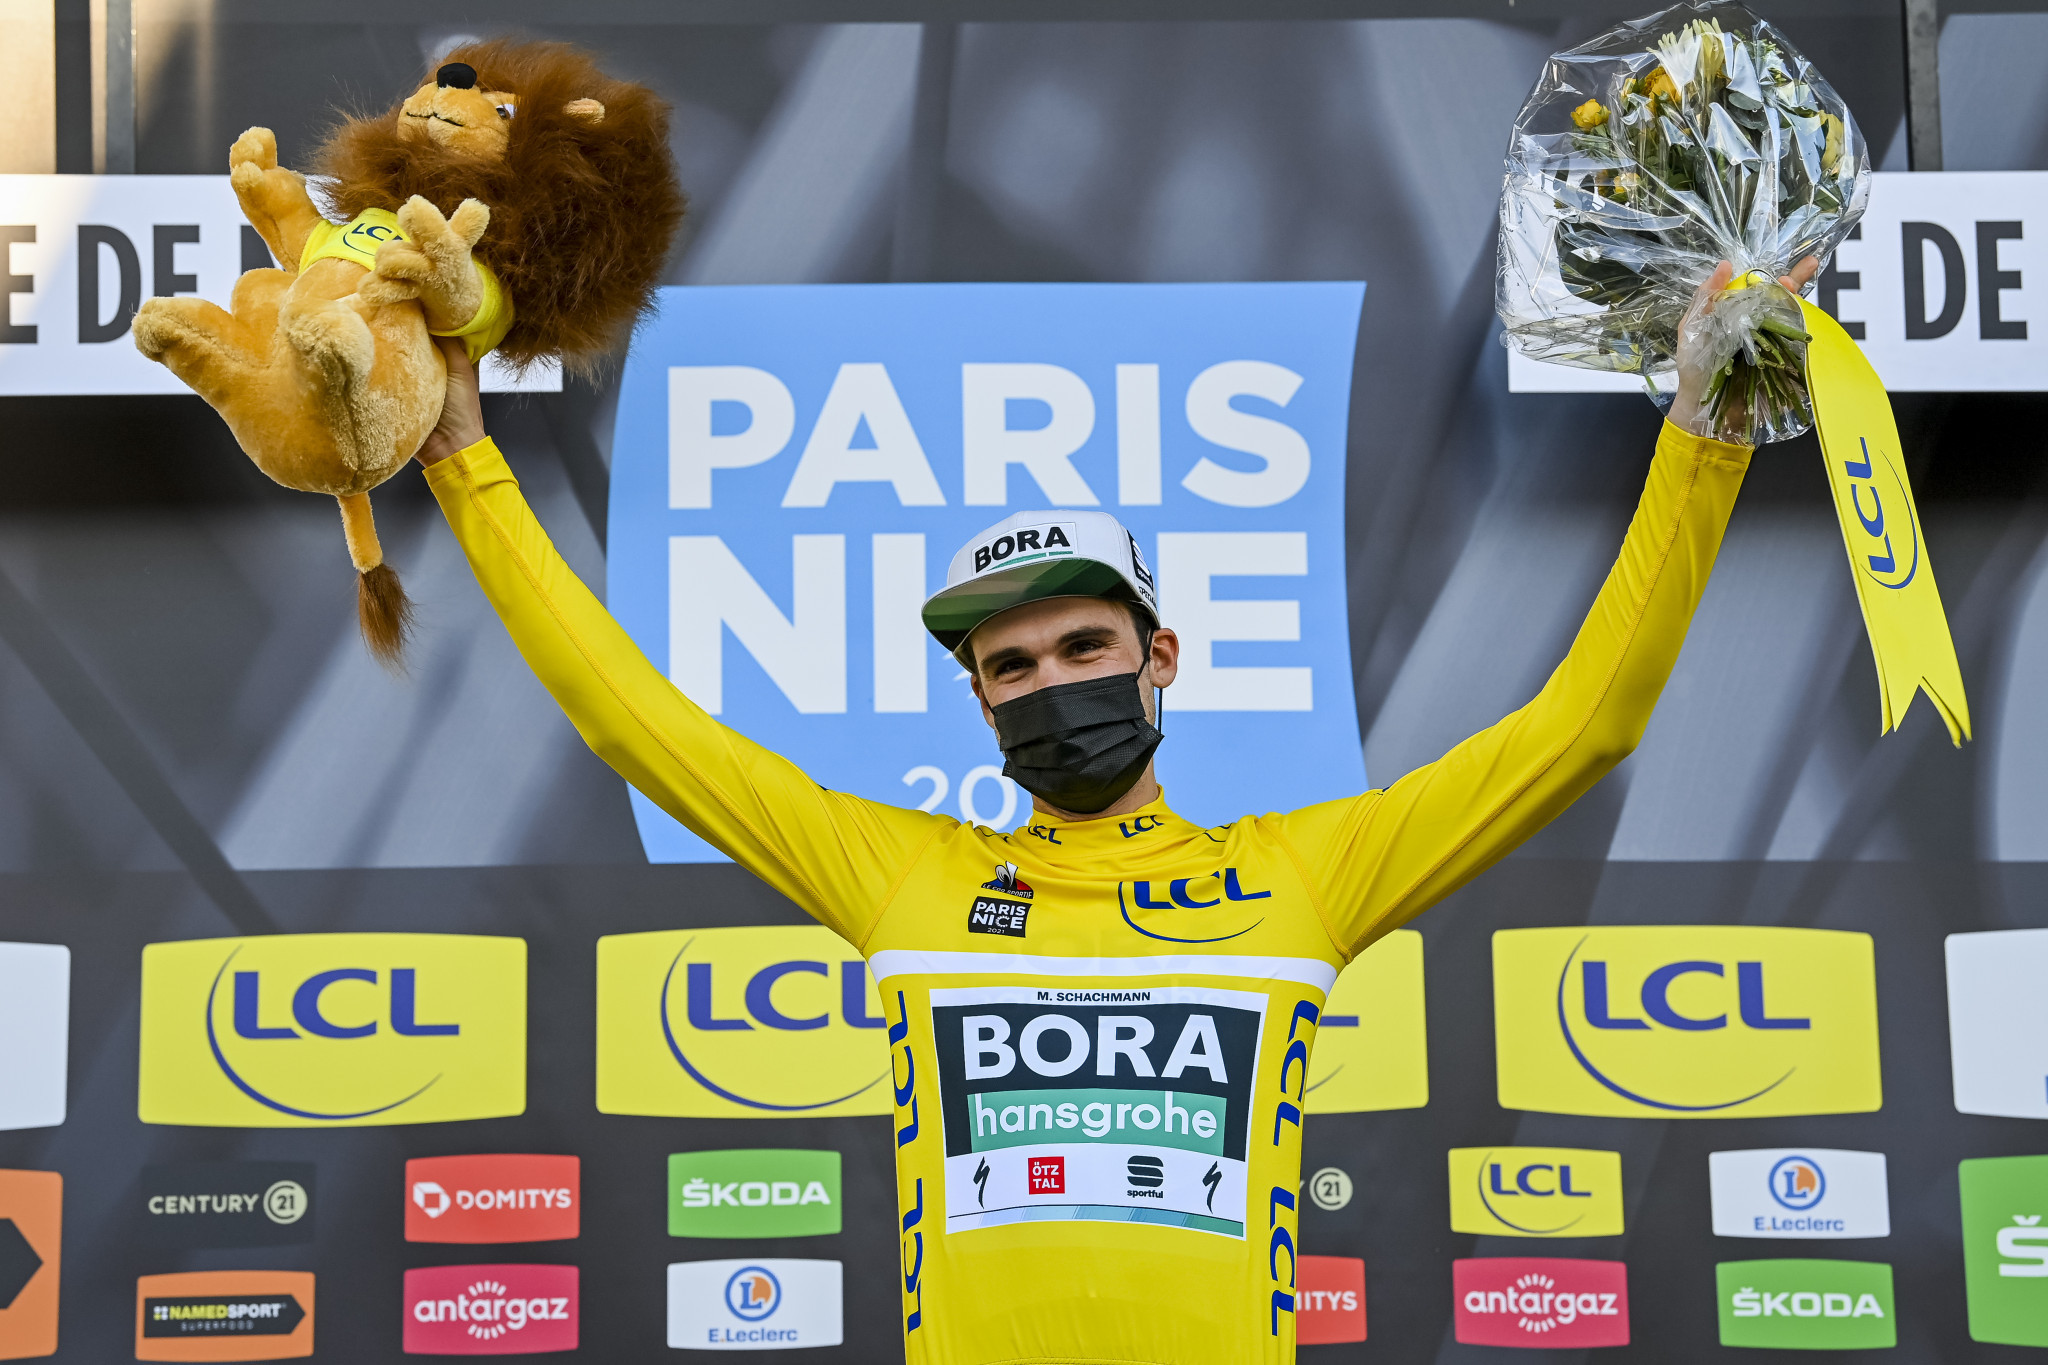 Max Schachmann triumphed at Paris-Nice for the second consecutive year ©Getty Images